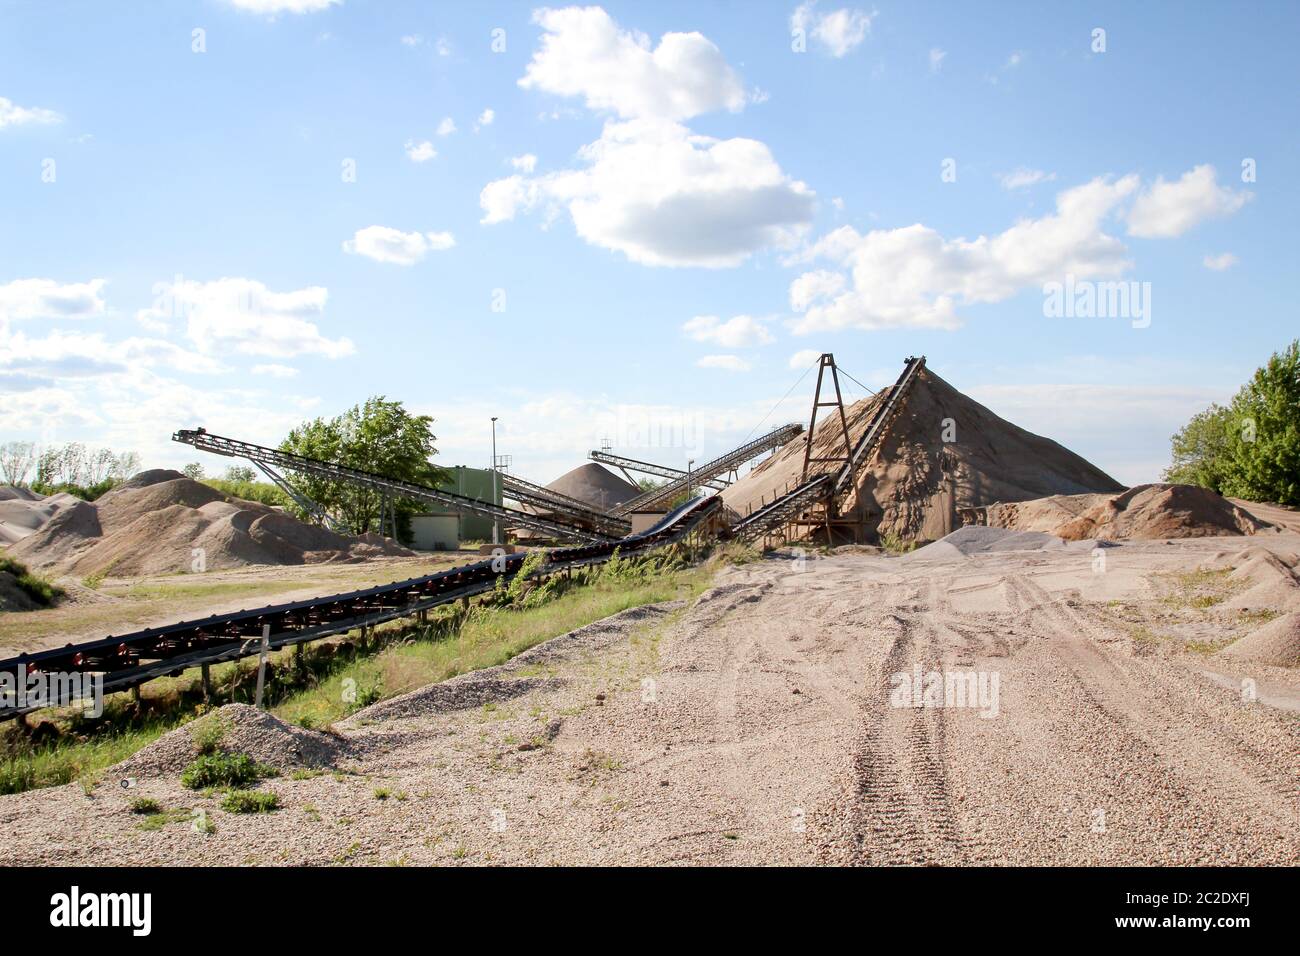 A string of transport belting in a gravel pit for transporting gravel and sand over long distances. Stock Photo